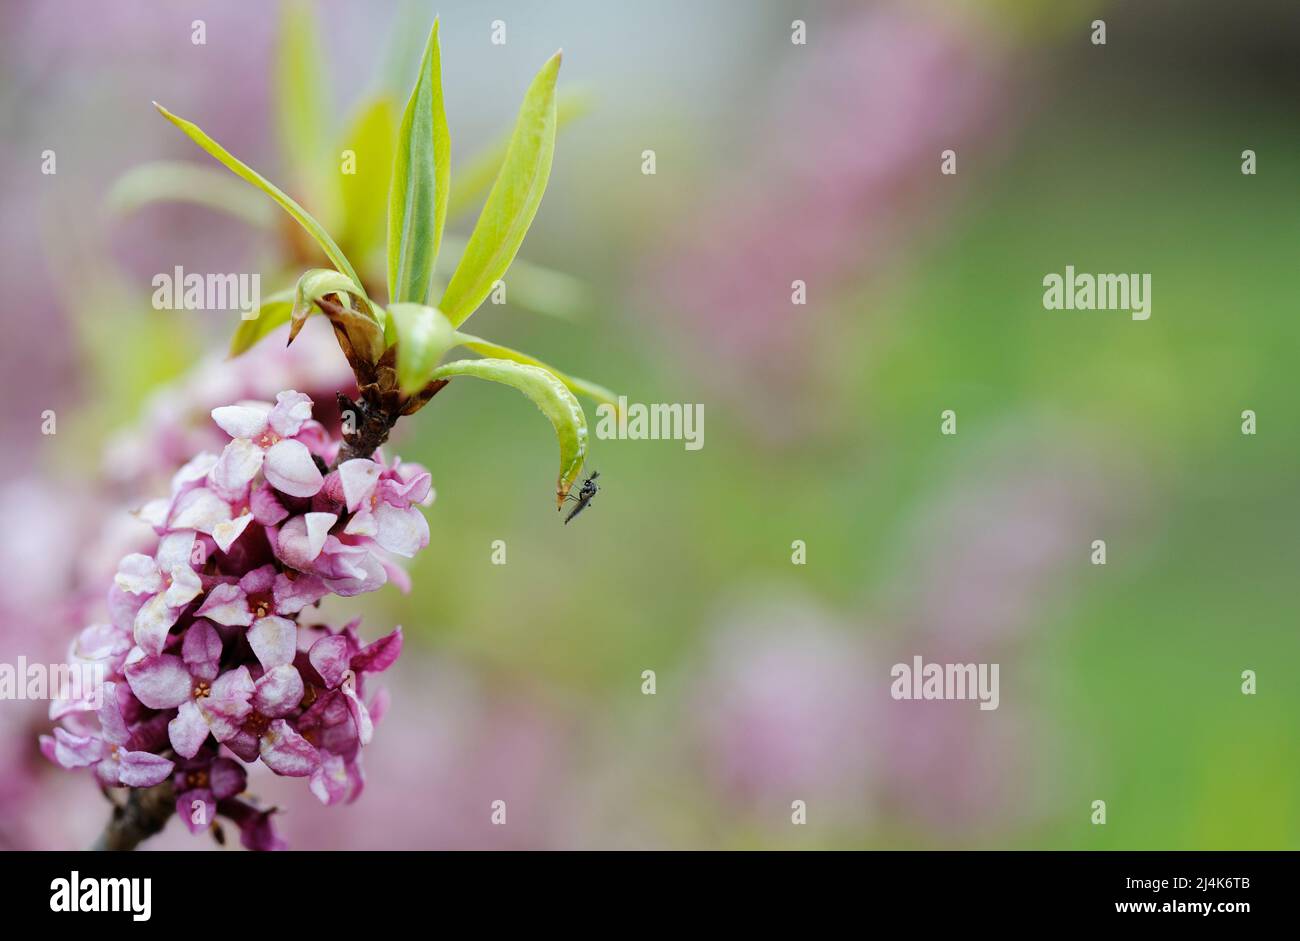 Daphne mezereum, commonly known as mezereon, branch with pink flowers against blurred background in early spring garden. Stock Photo